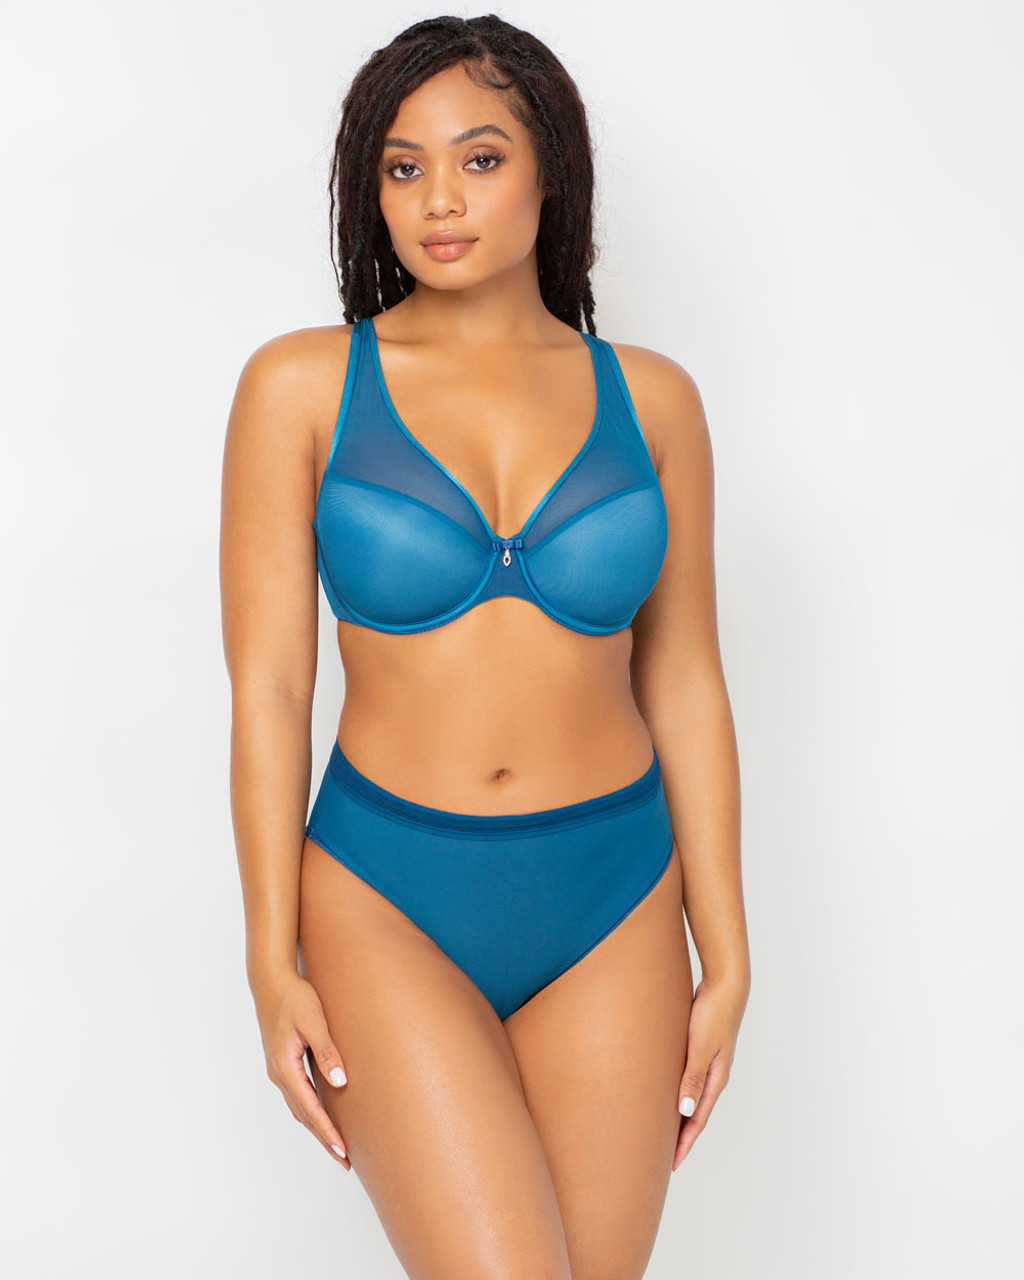 Curvy Couture Women's Sheer Mesh Full Coverage Unlined Underwire Bra Blue  Sapphire 38g : Target